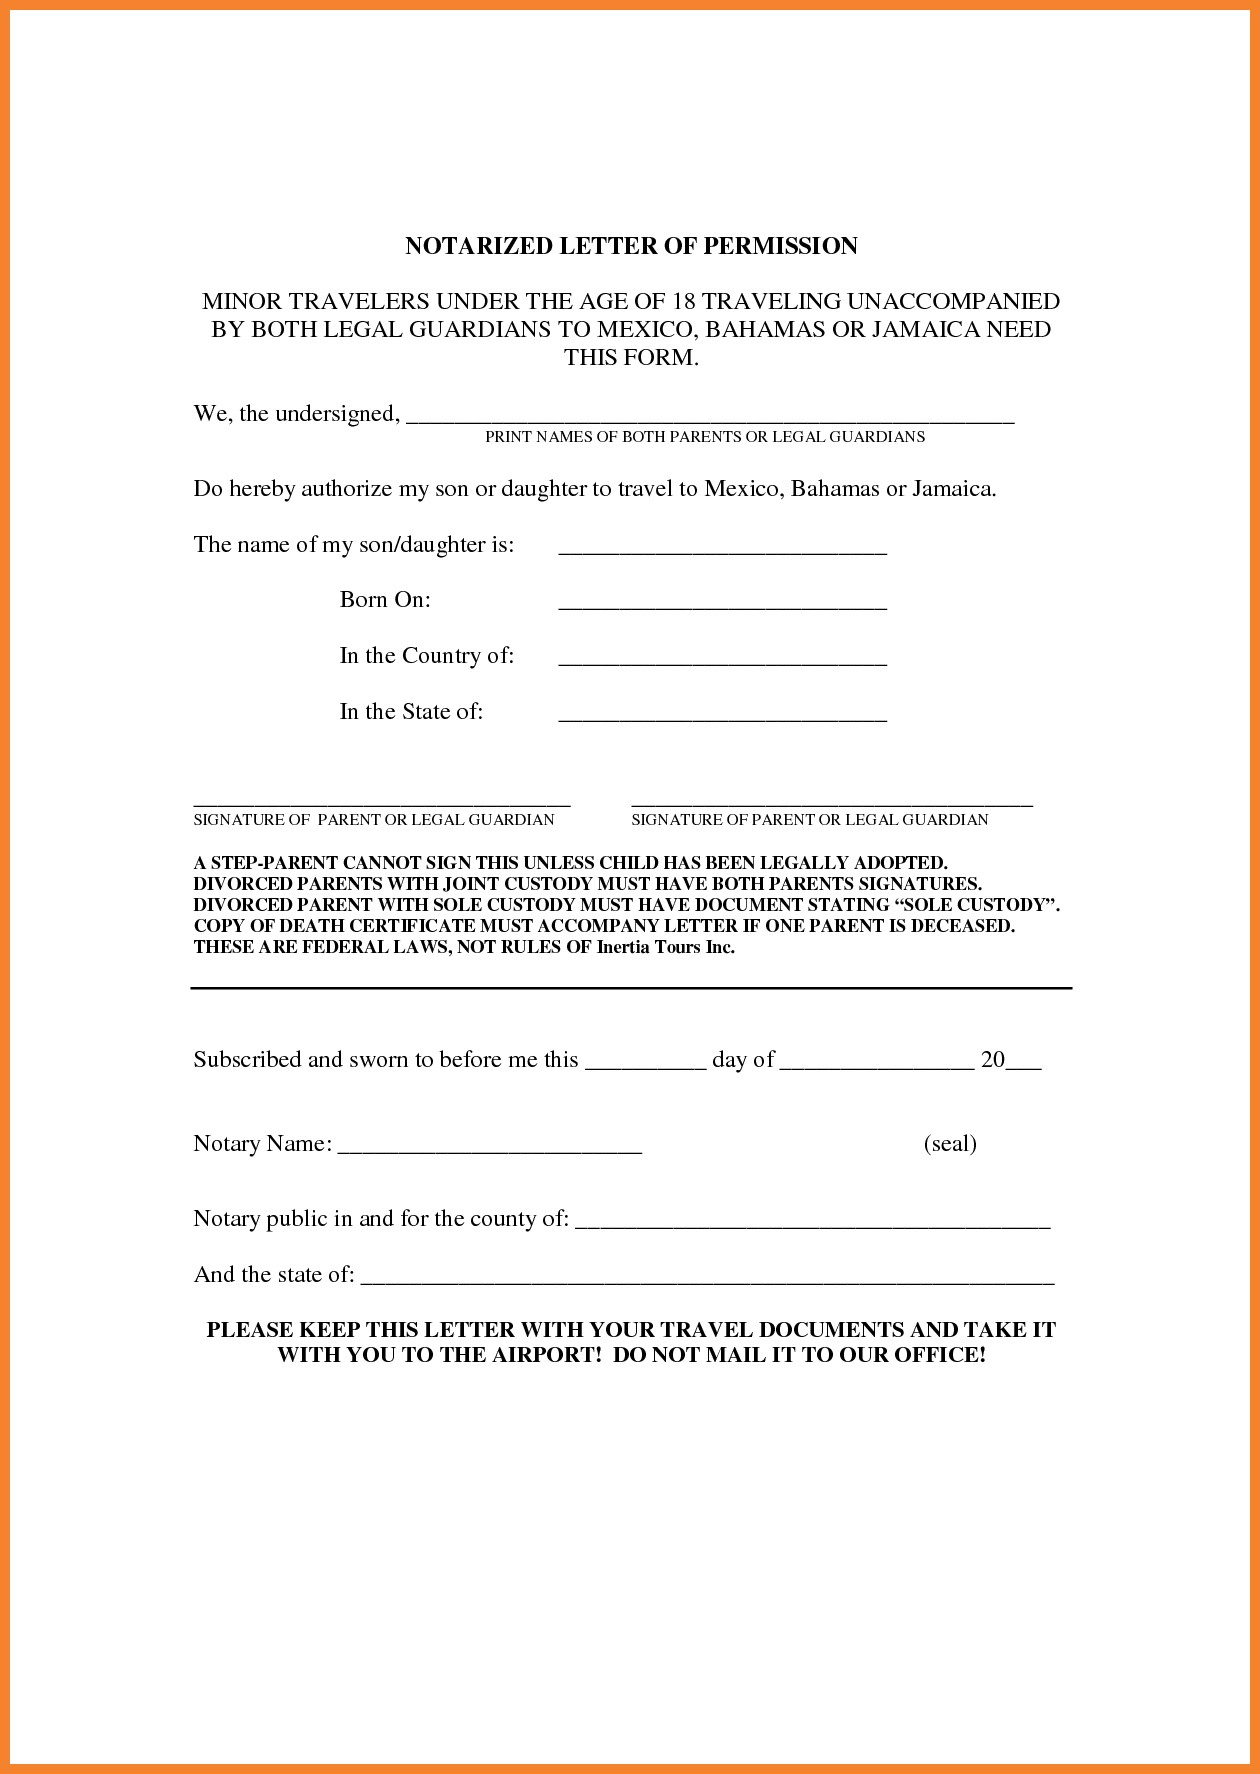 notarized-travel-consent-letter-template-samples-letter-template